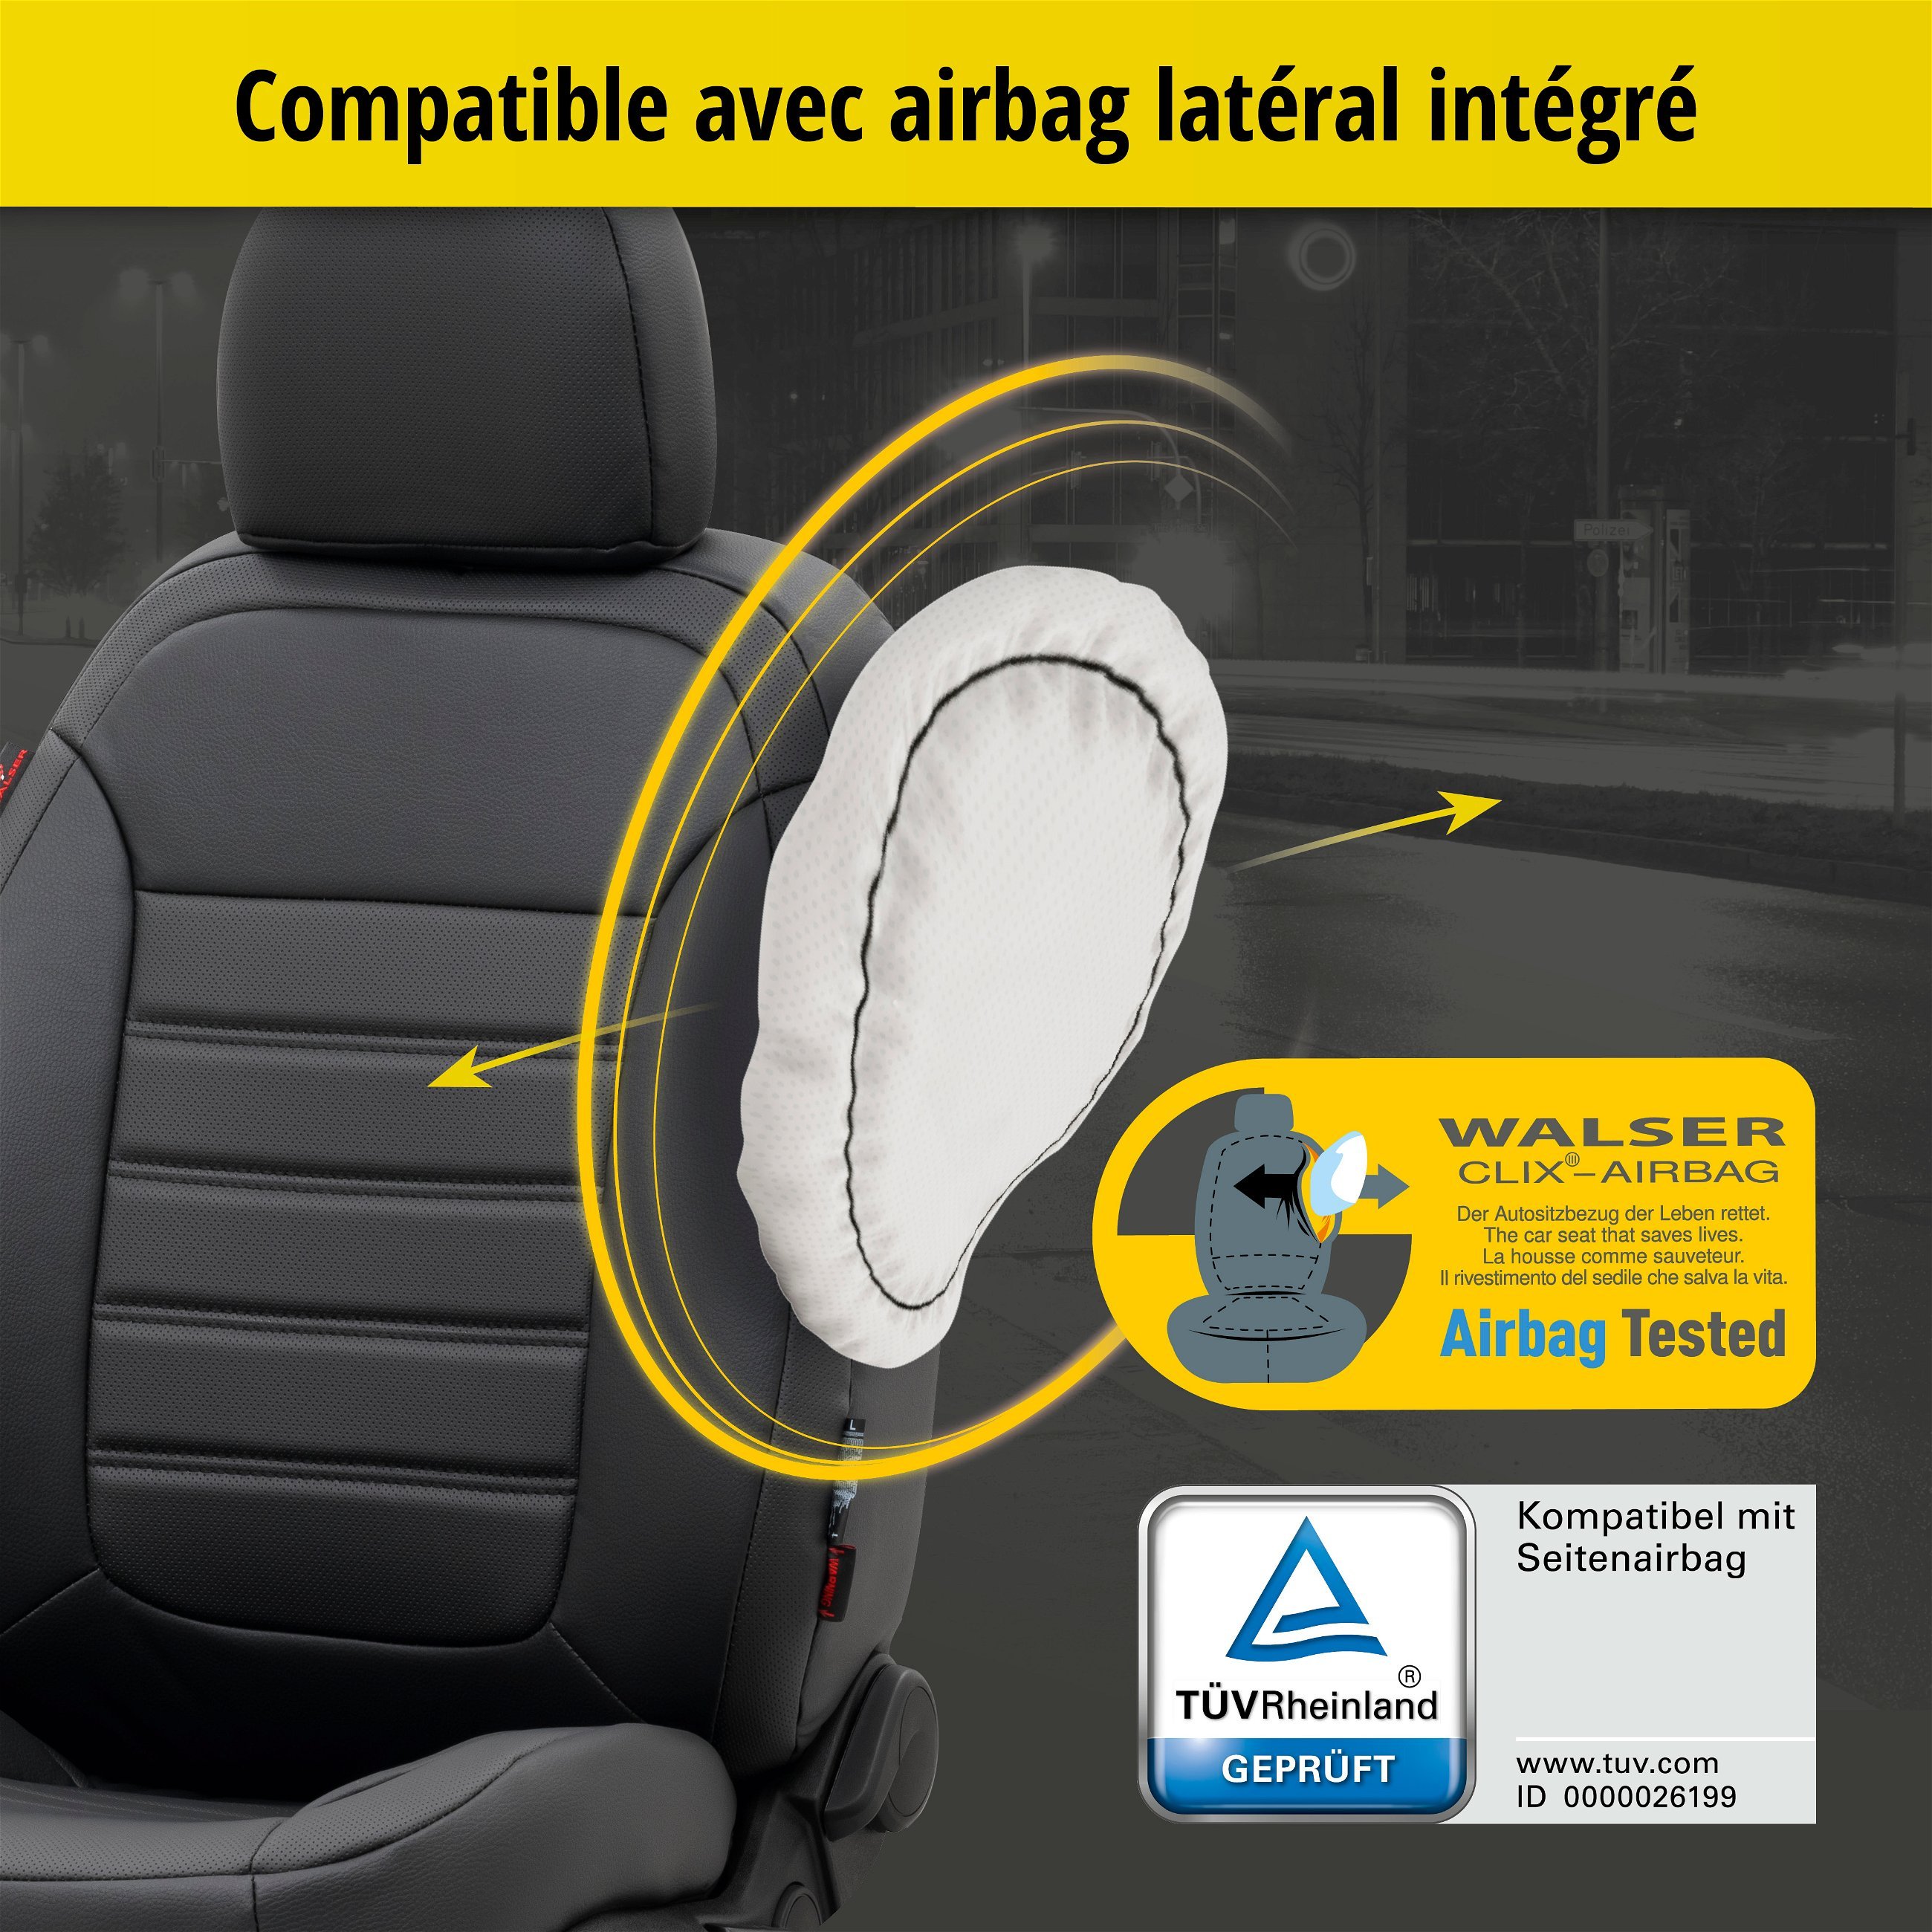 Housse de siège Robusto pour Opel Astra H 01/2004-05/2014, Astra H notchback 02/2007-05/2014, 2 housses de siège pour les sièges normaux